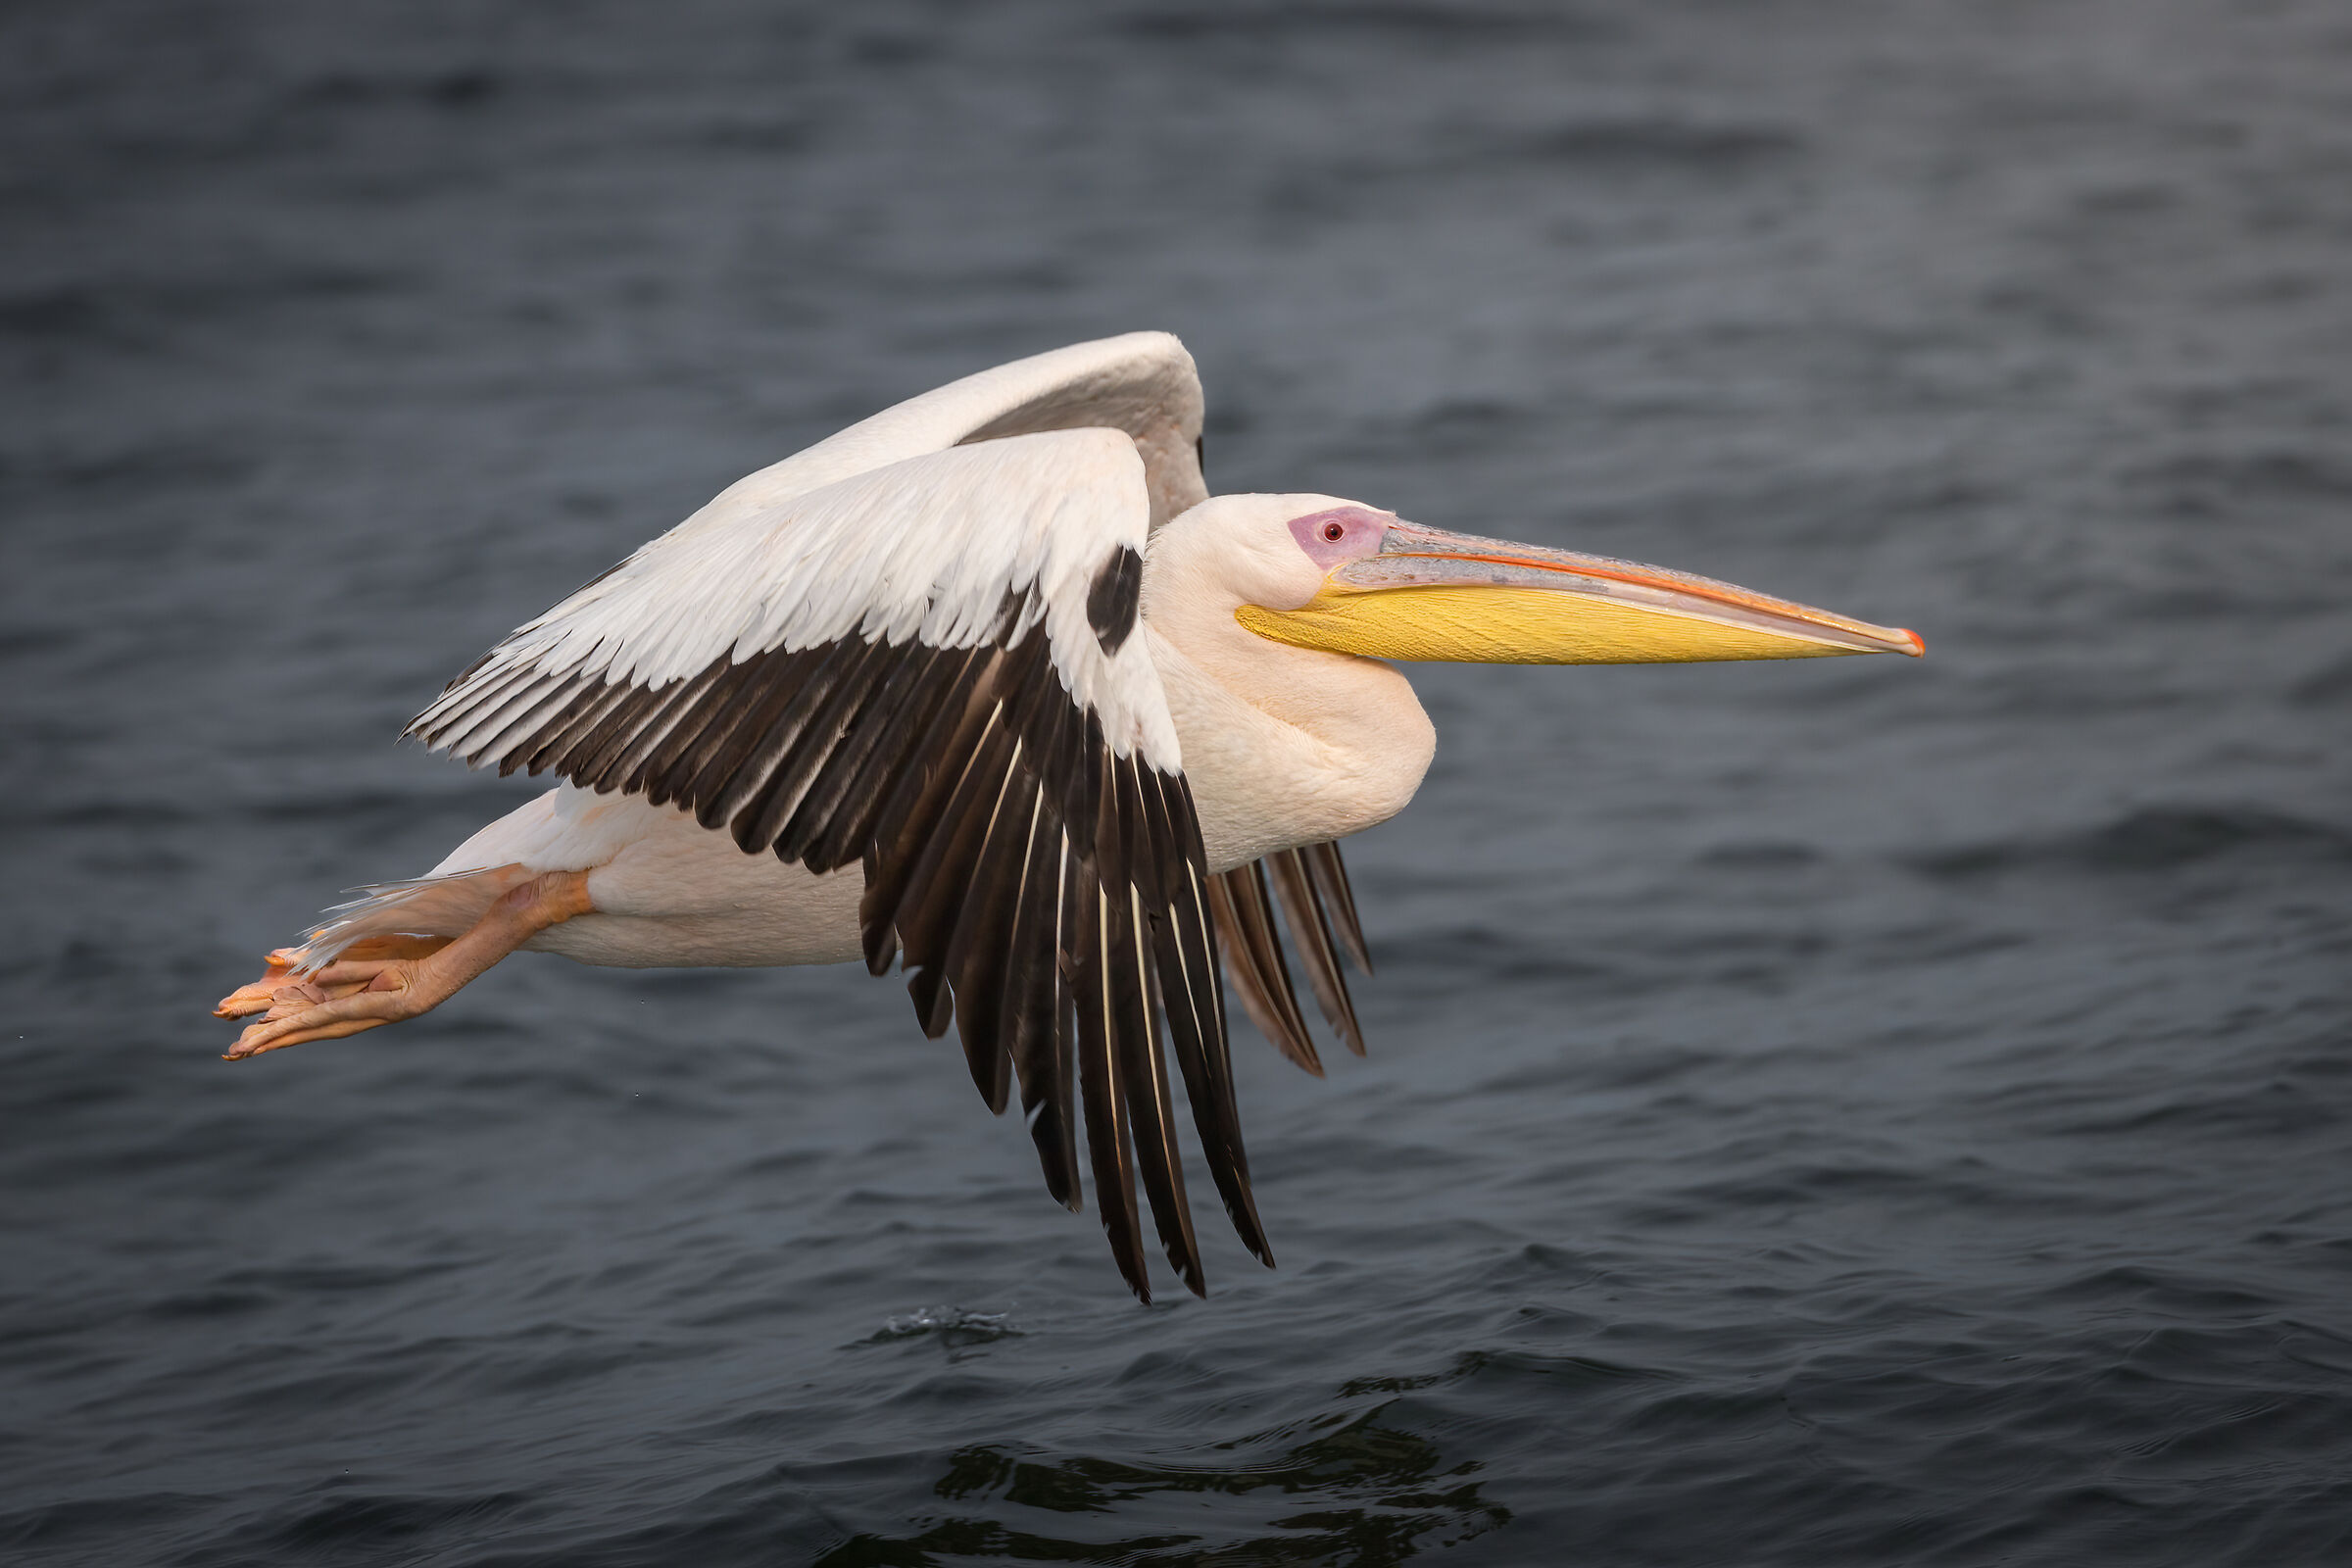 Large white pelican...